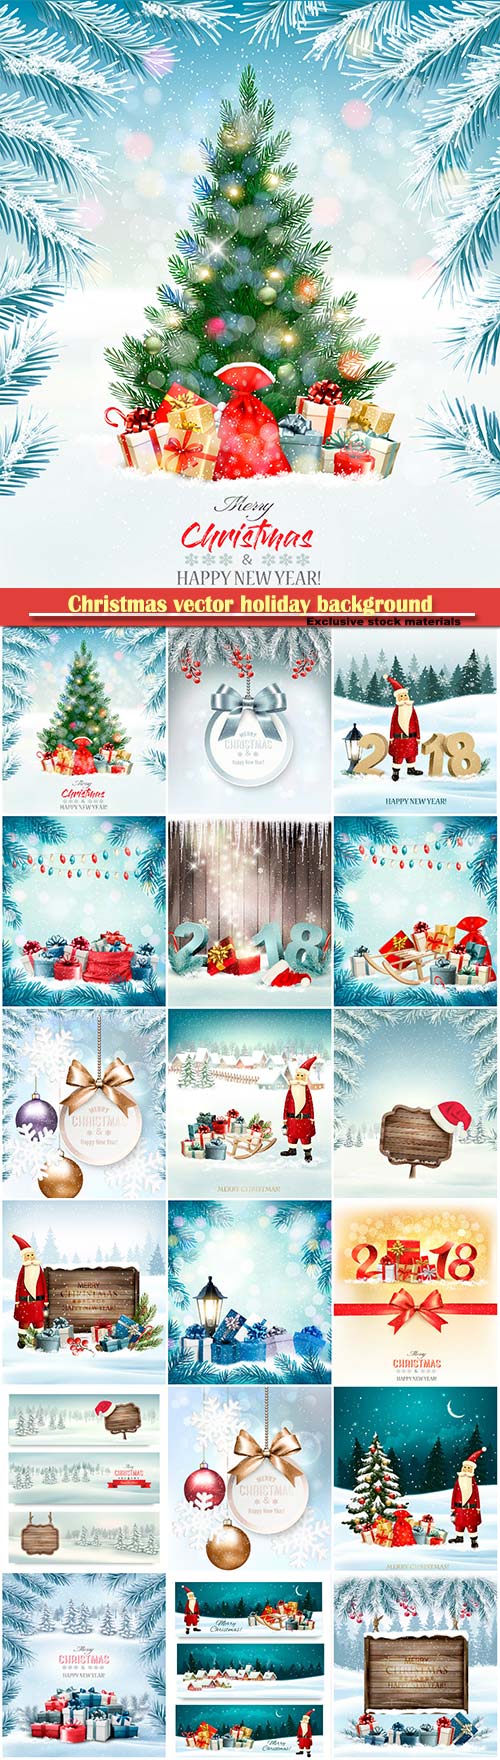 Christmas vector holiday background with presents and garland, holiday back ...